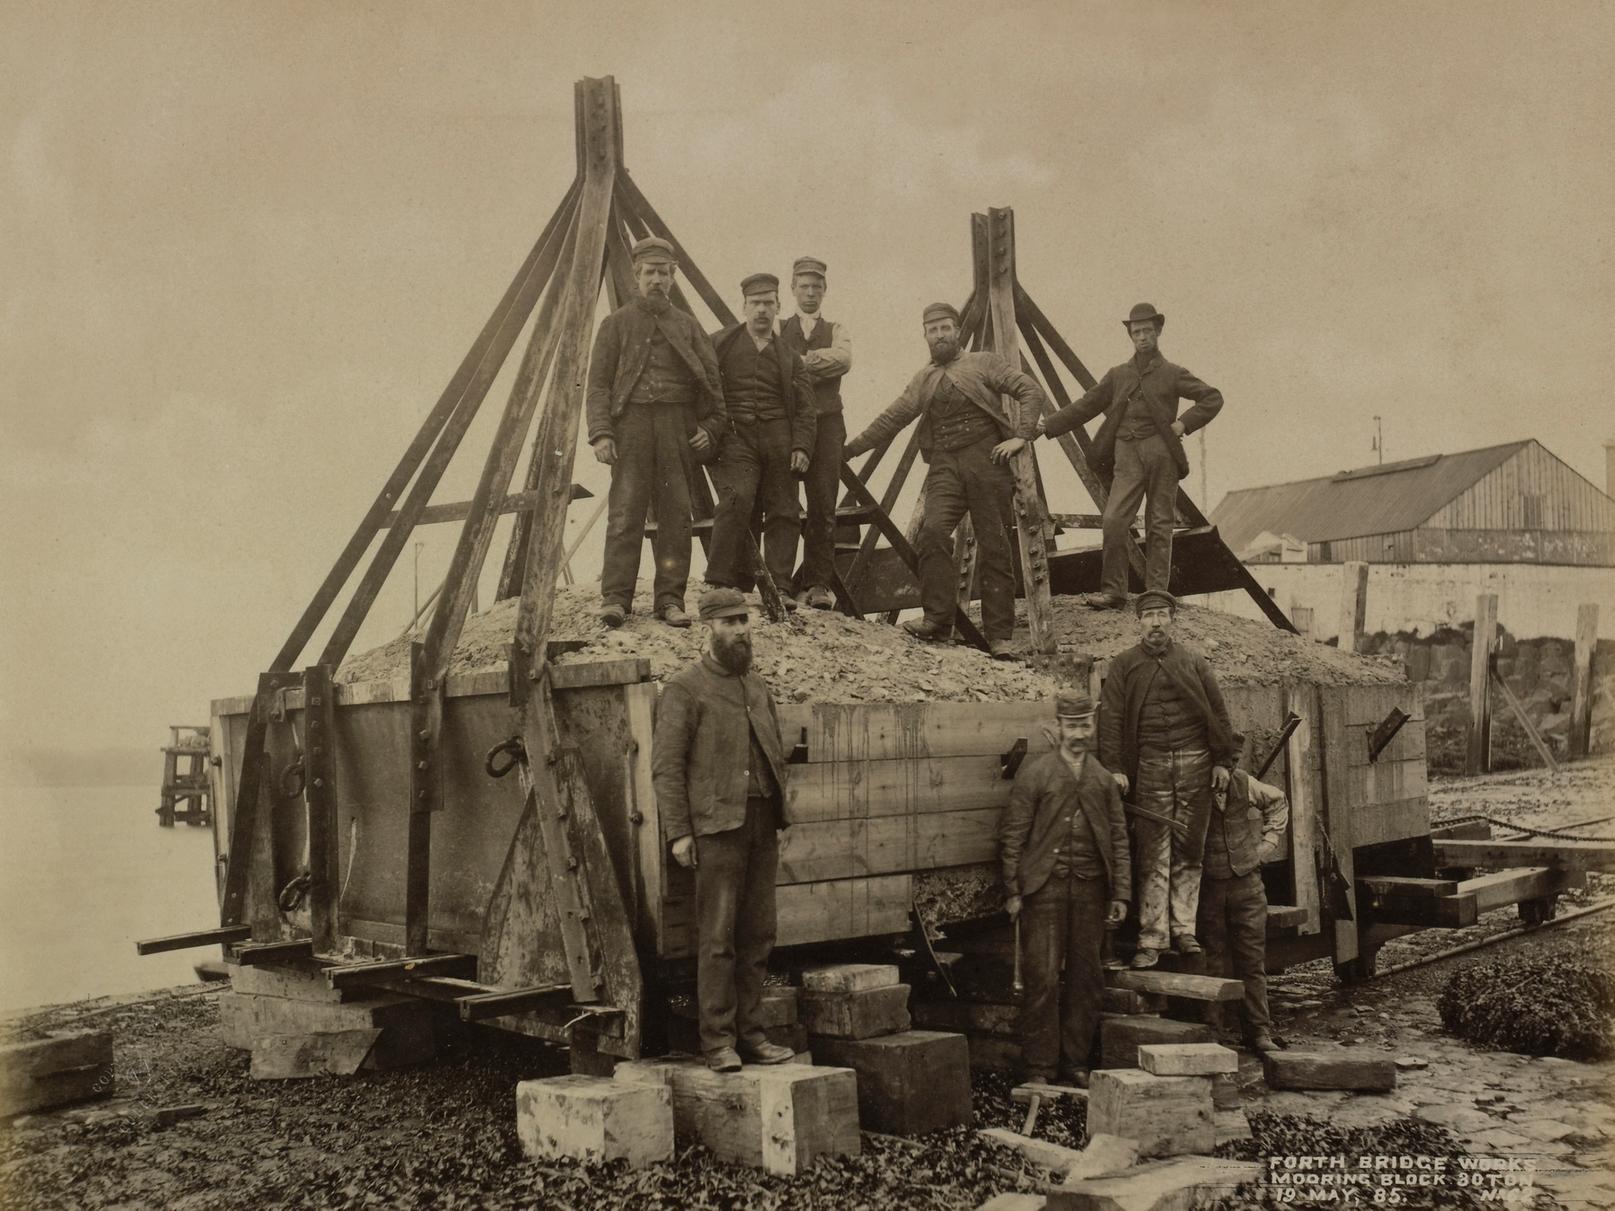 The sea was for centuries the highway of Scotland but advances in engineering brought new alternatives. These men are pictured with mooring blocks for the Forth Bridge in 1885.